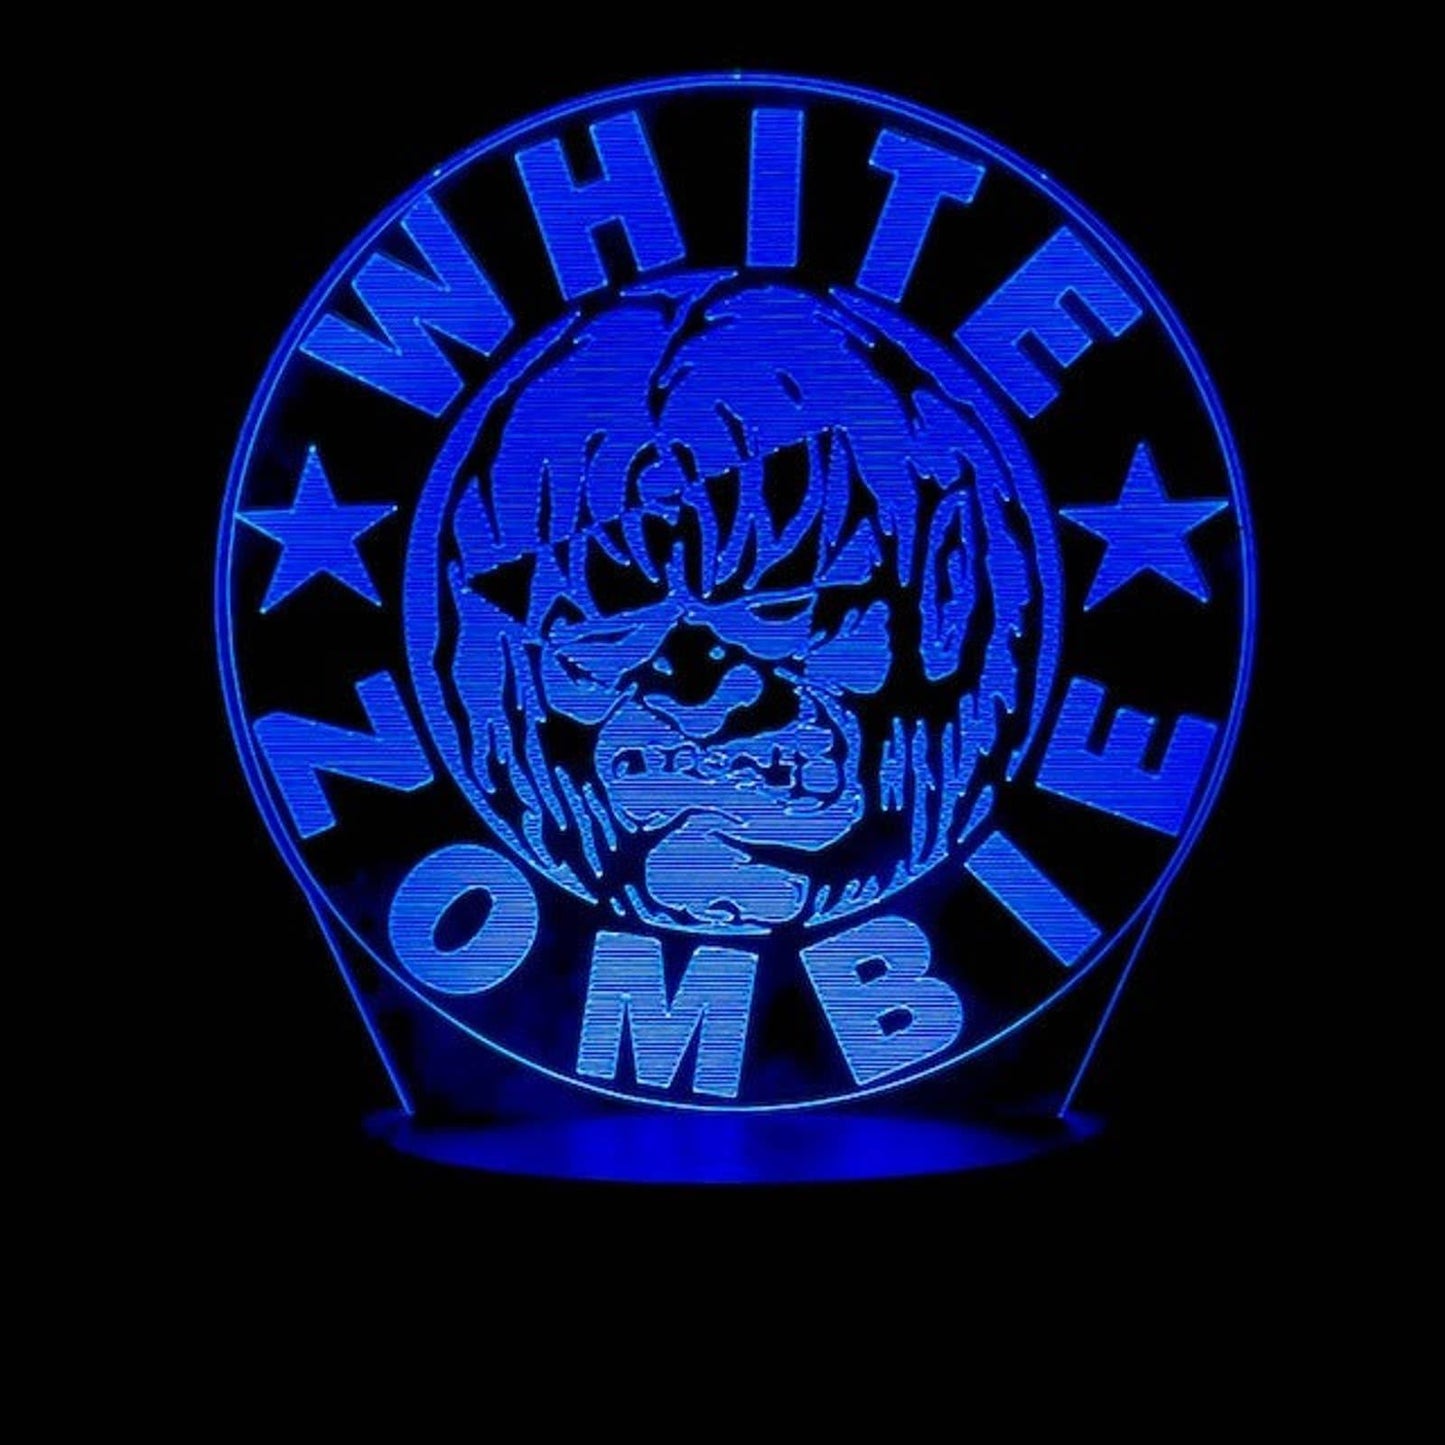 White Zombie 3D LED Night-Light 7 Color Changing Lamp w/ Touch Switch